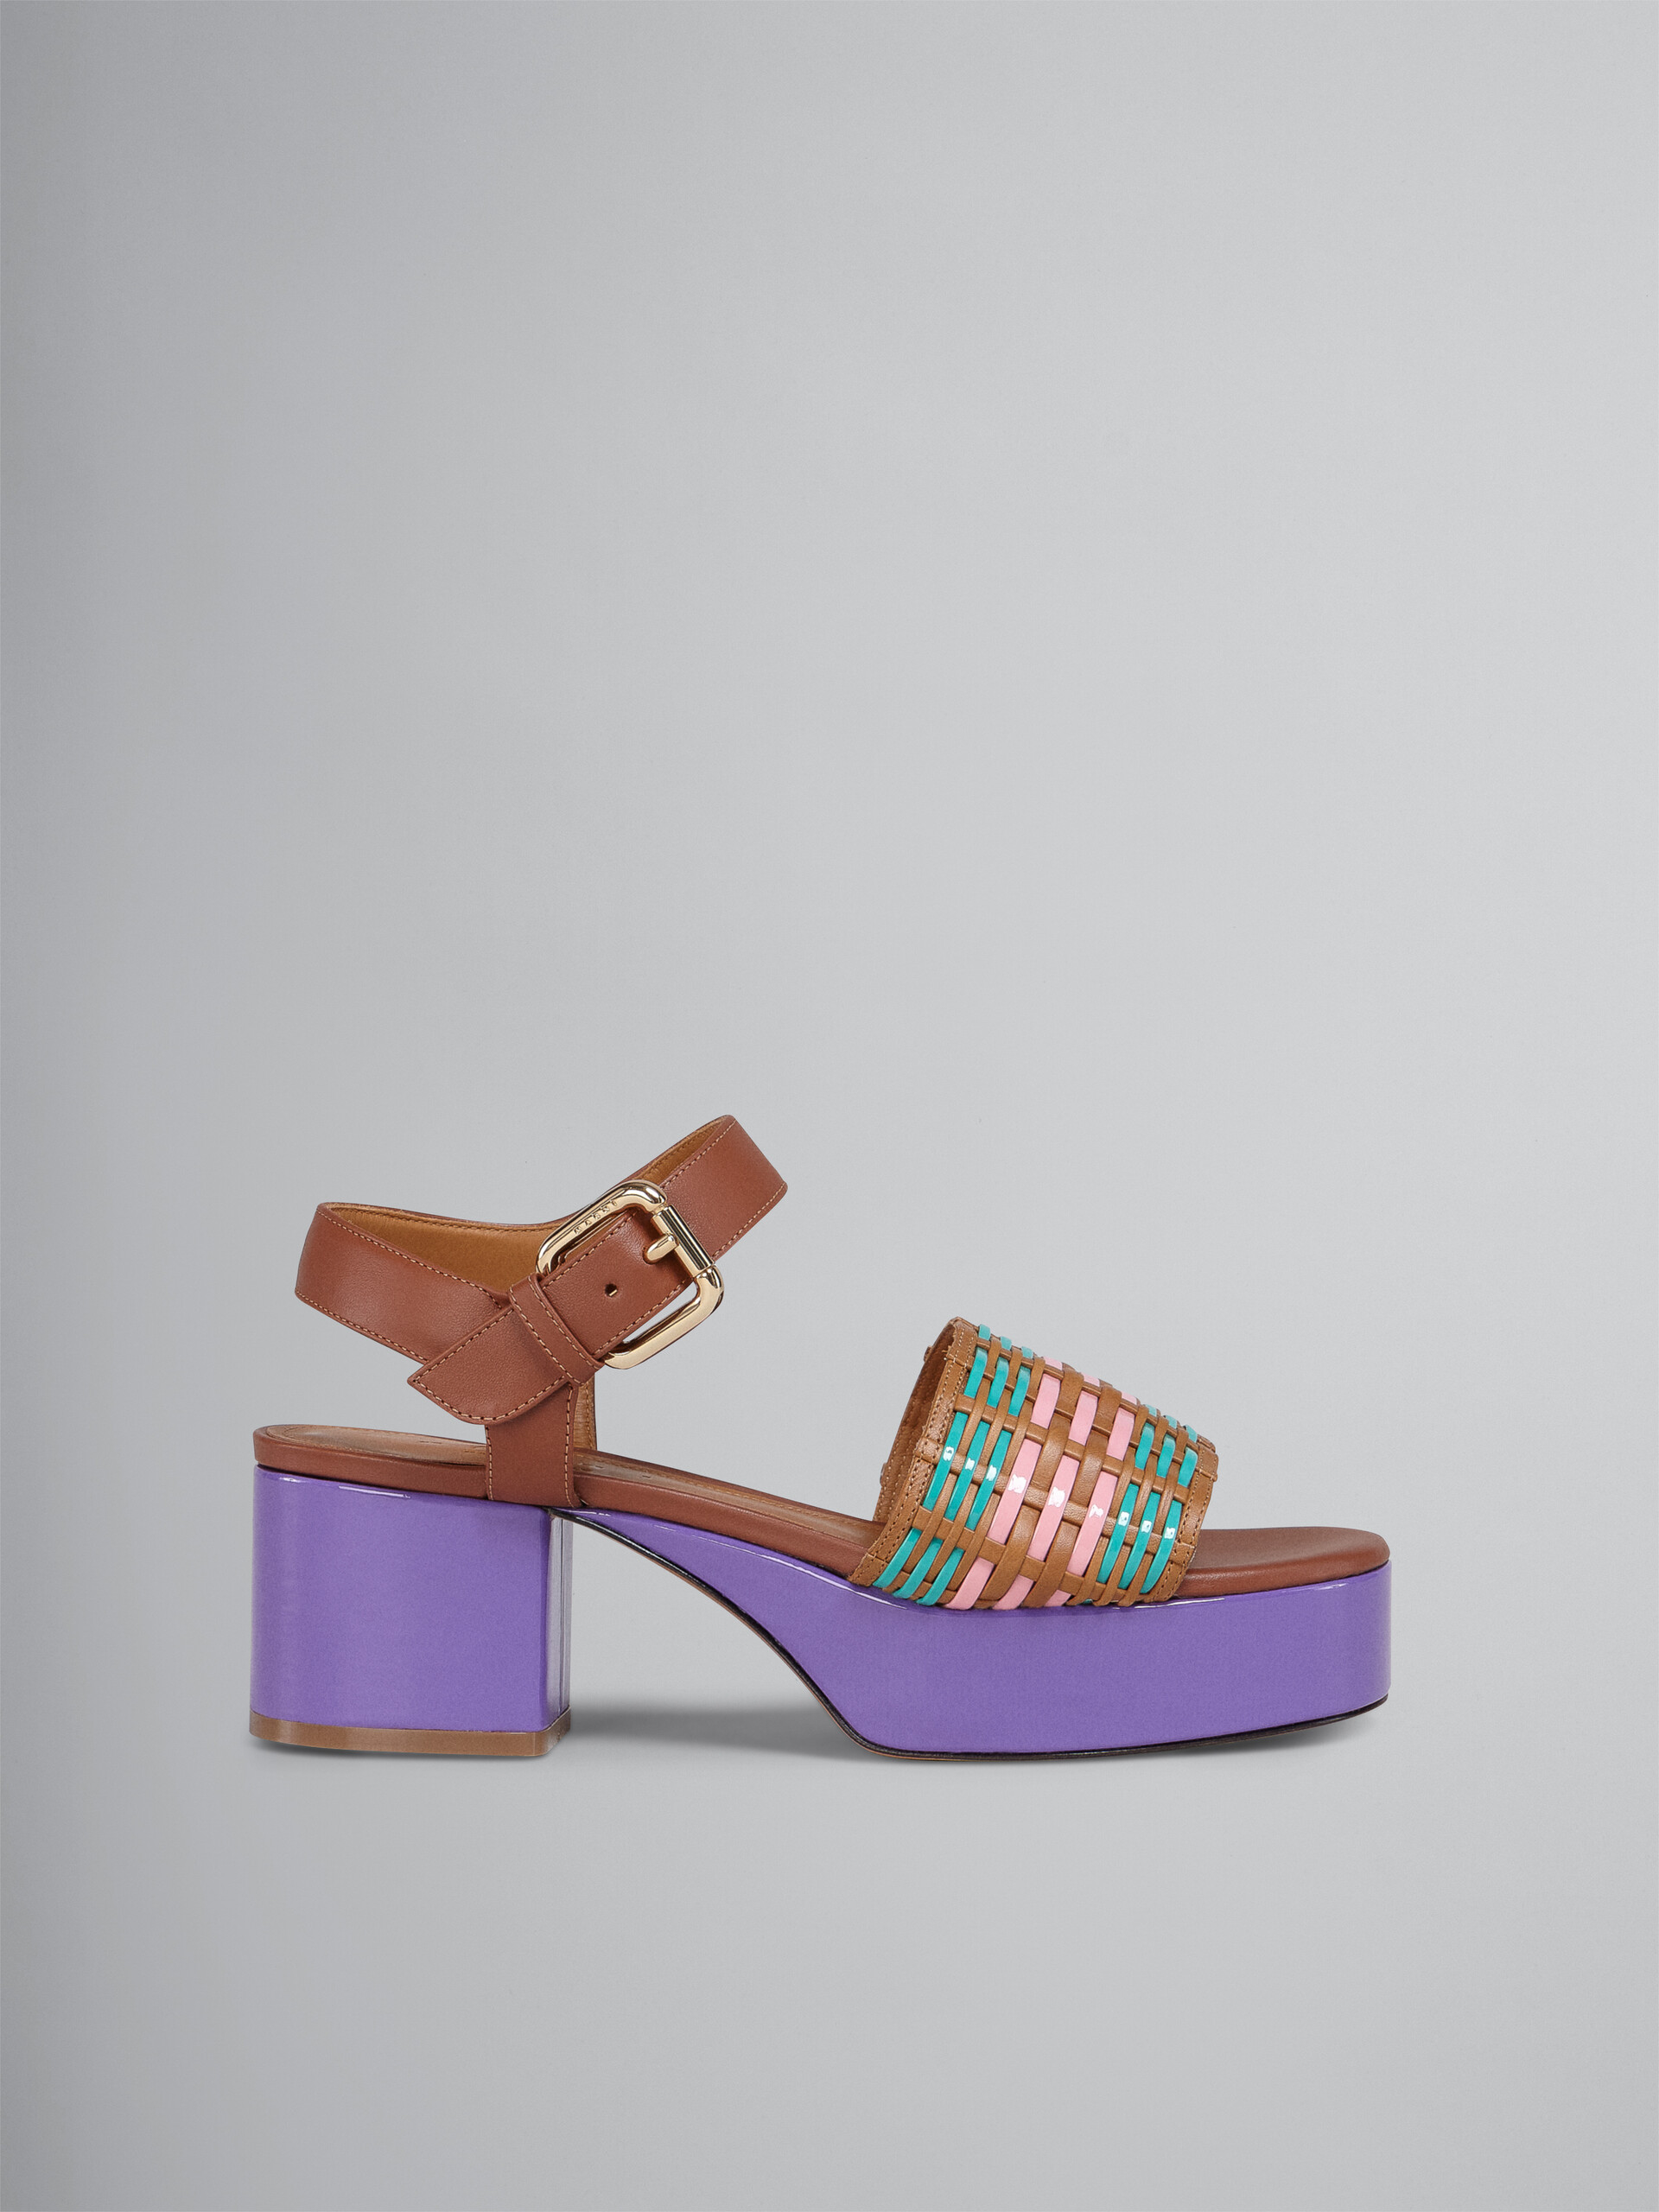 Hand woven vegetable-tanned leather sandal - Sandals - Image 1